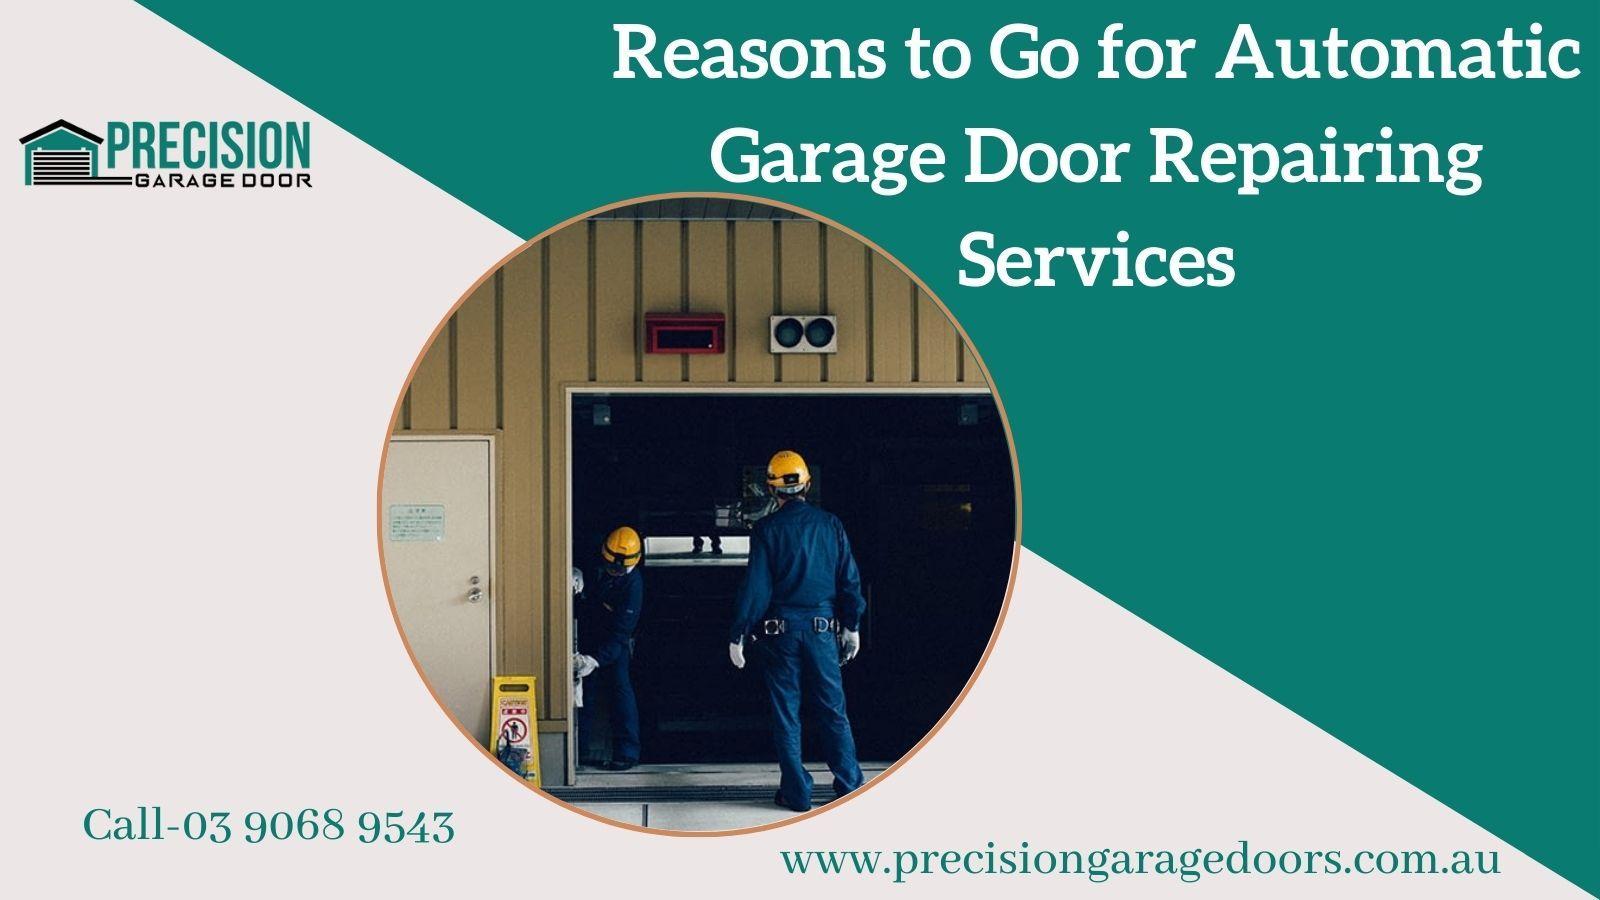 Reasons to Go for Automatic Garage Door Repairing Services